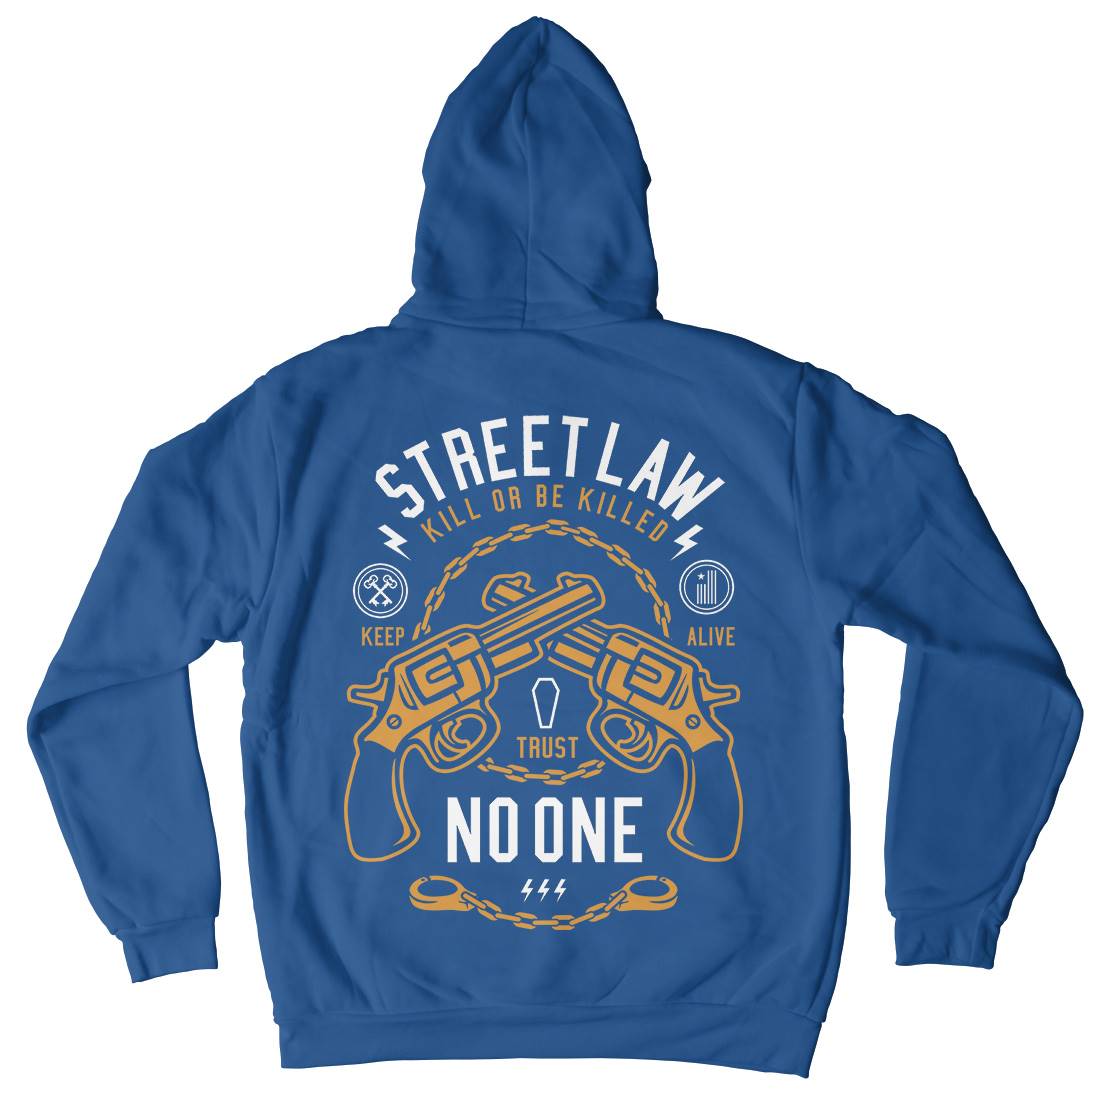 Street Law Mens Hoodie With Pocket Quotes A286